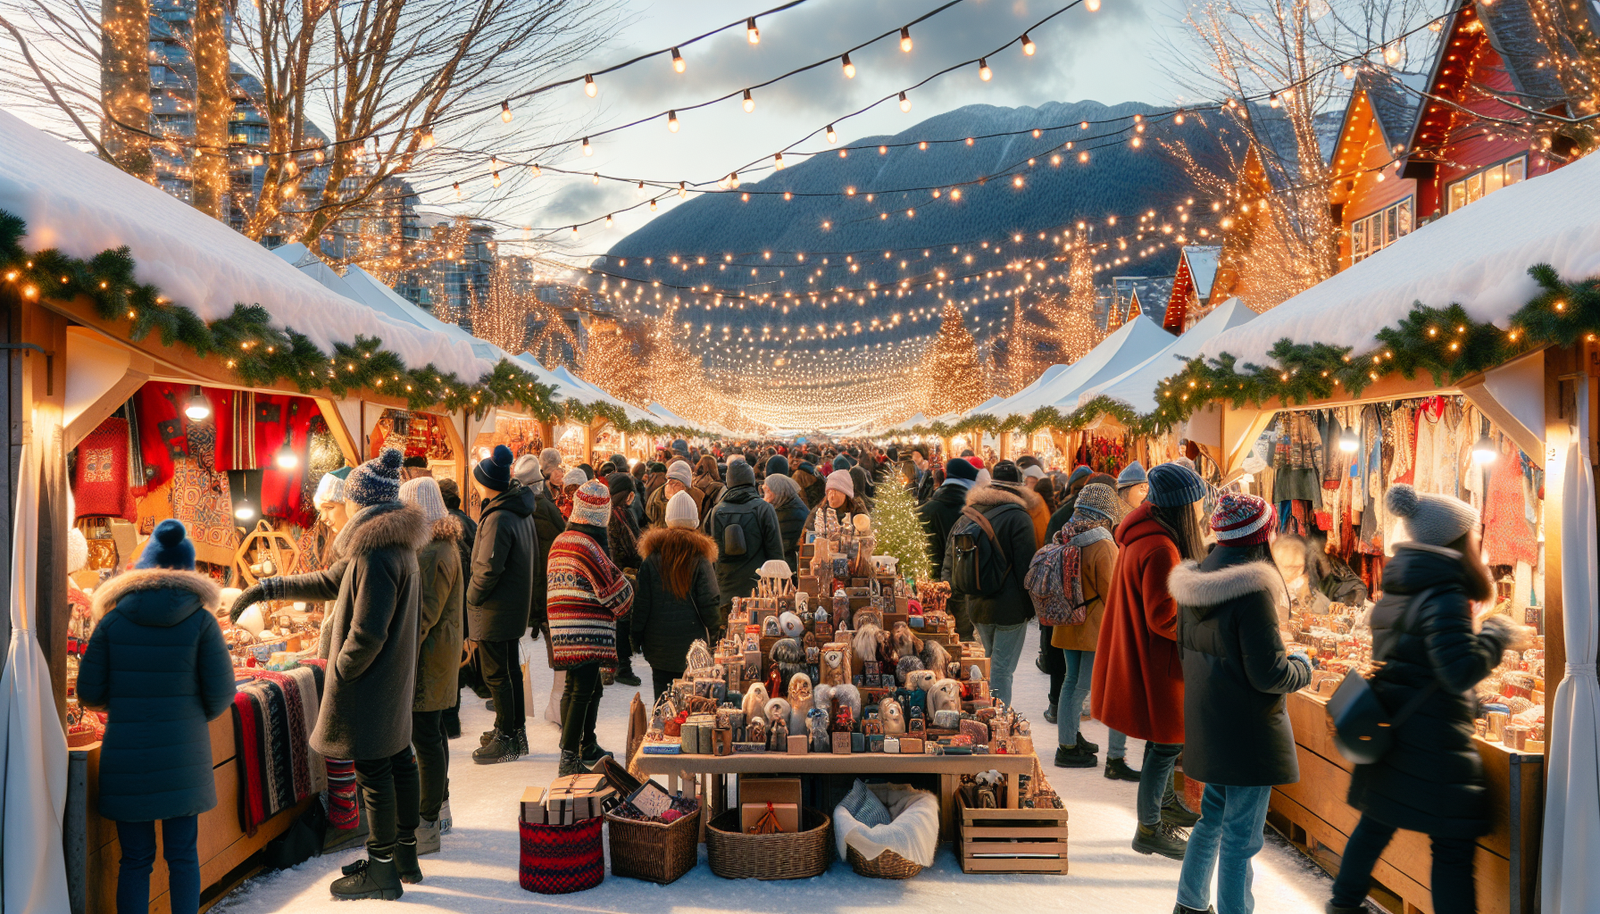 North Vancouver's Festive Finds: Markets and Merriment with local artisans and holiday shopping